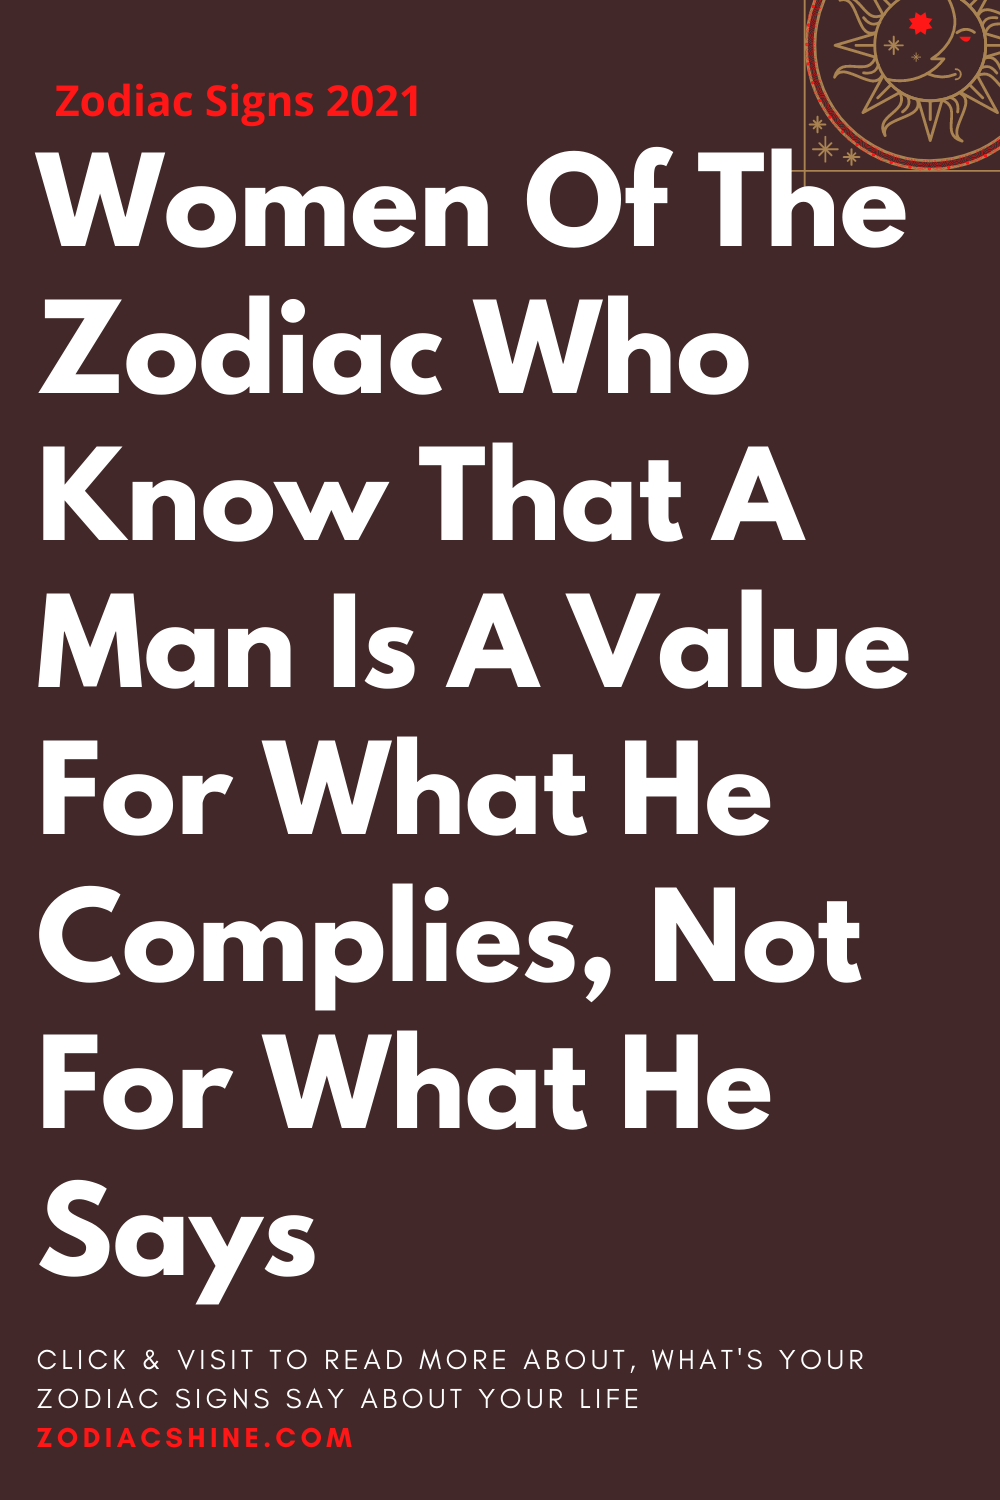 Women Of The Zodiac Who Know That A Man Is A Value For What He Complies Not For What He Says